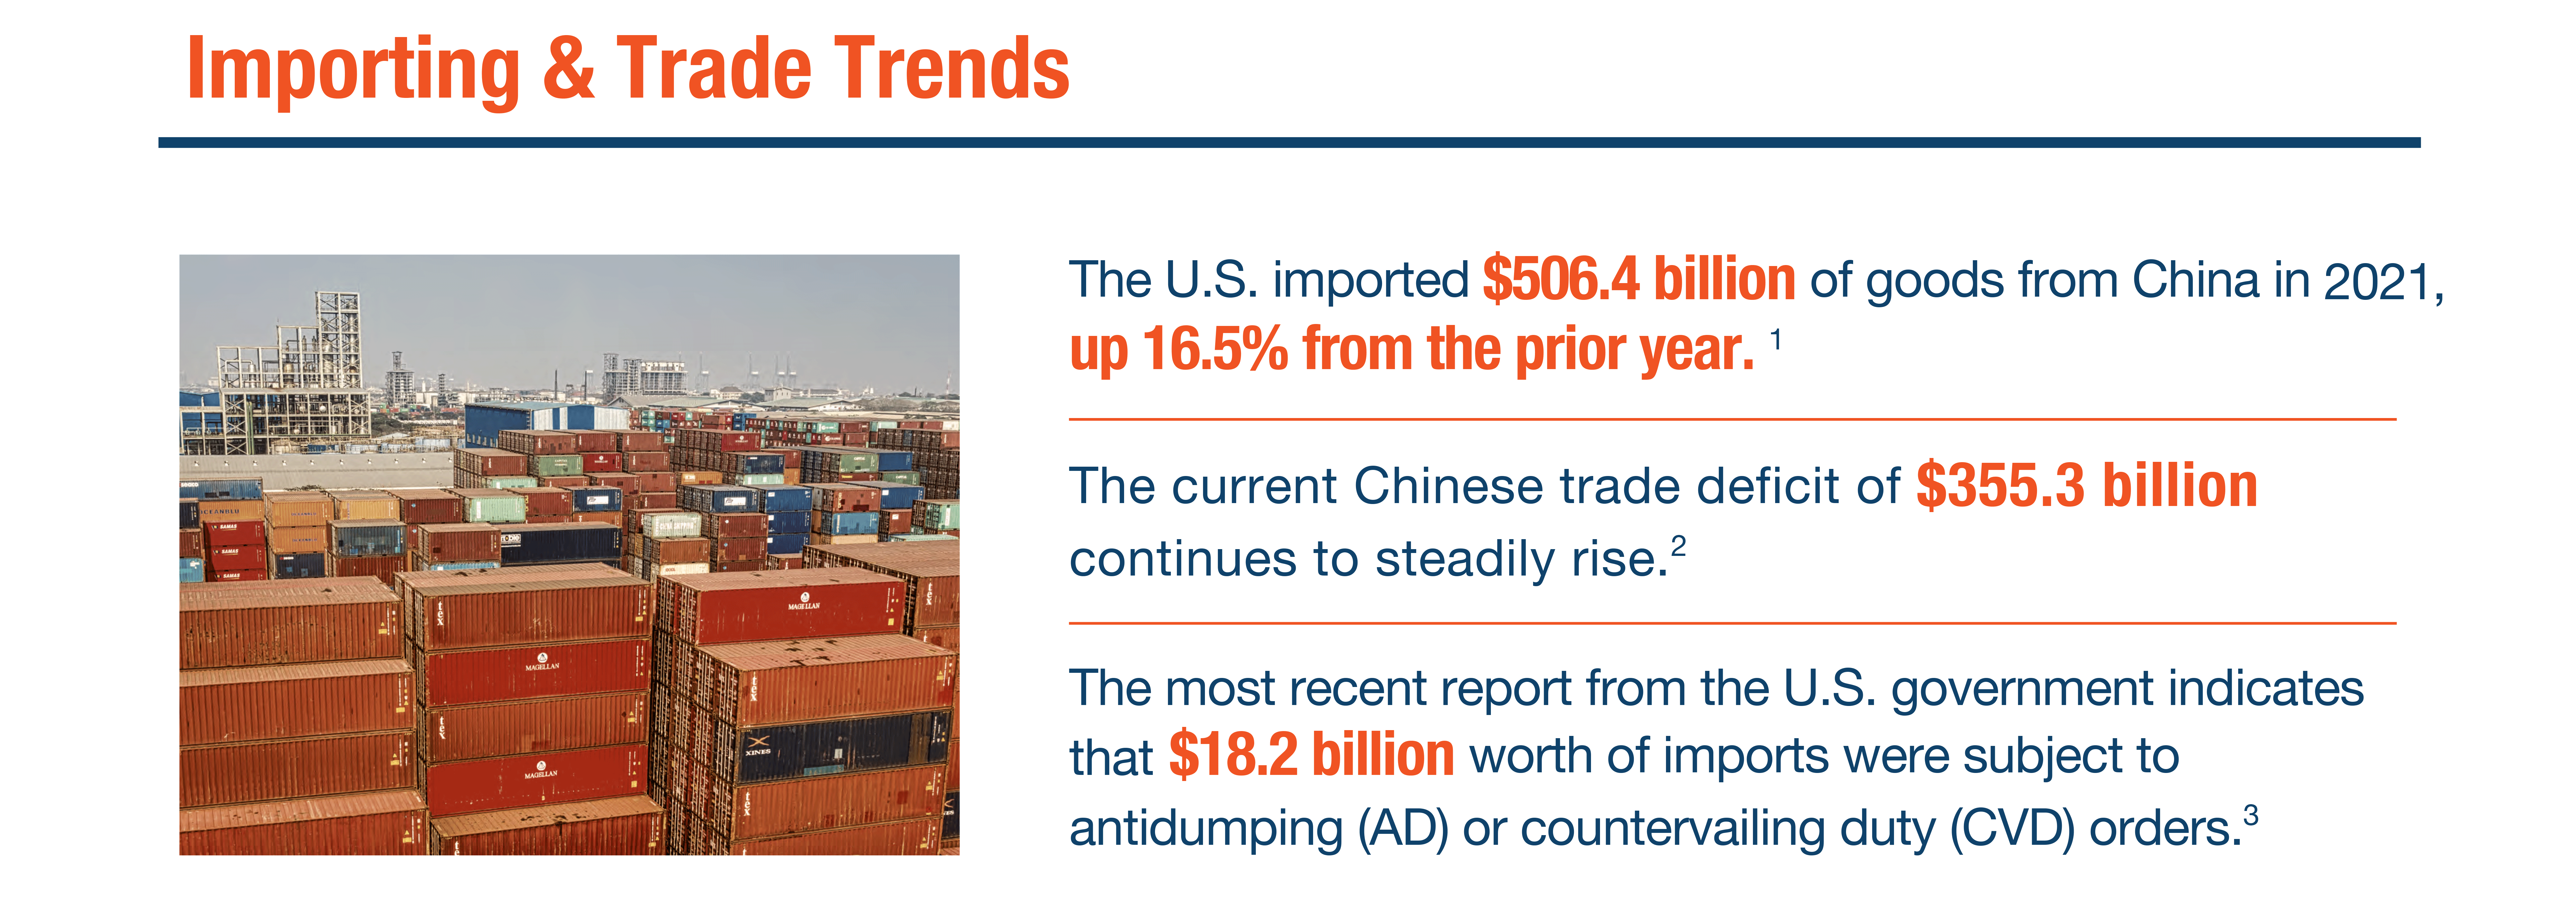 Importing & Trade Trends

The U.S. imported $506.4 billion of goods from China in 2021,
up 16.5% from the prior year. 

The current Chinese trade deficit of $355.3 billion
continues to steadily rise.

The most recent report from the U.S. government indicates that $18.2 billion worth of imports were subject to antidumping (AD) or countervailing duty (CVD) orders.
